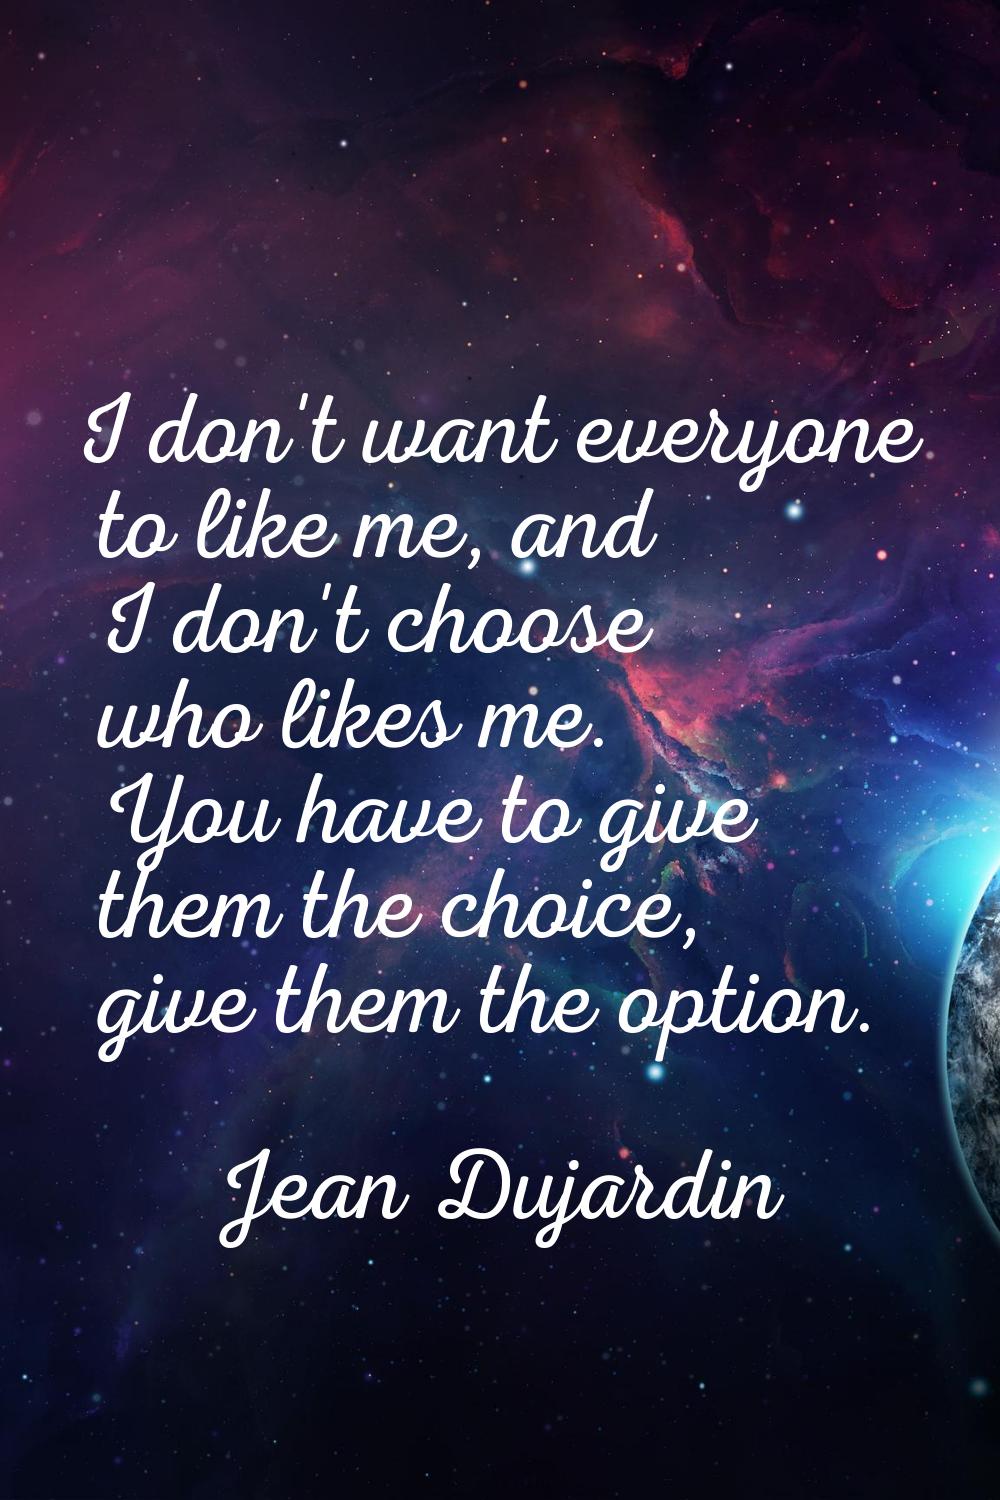 I don't want everyone to like me, and I don't choose who likes me. You have to give them the choice